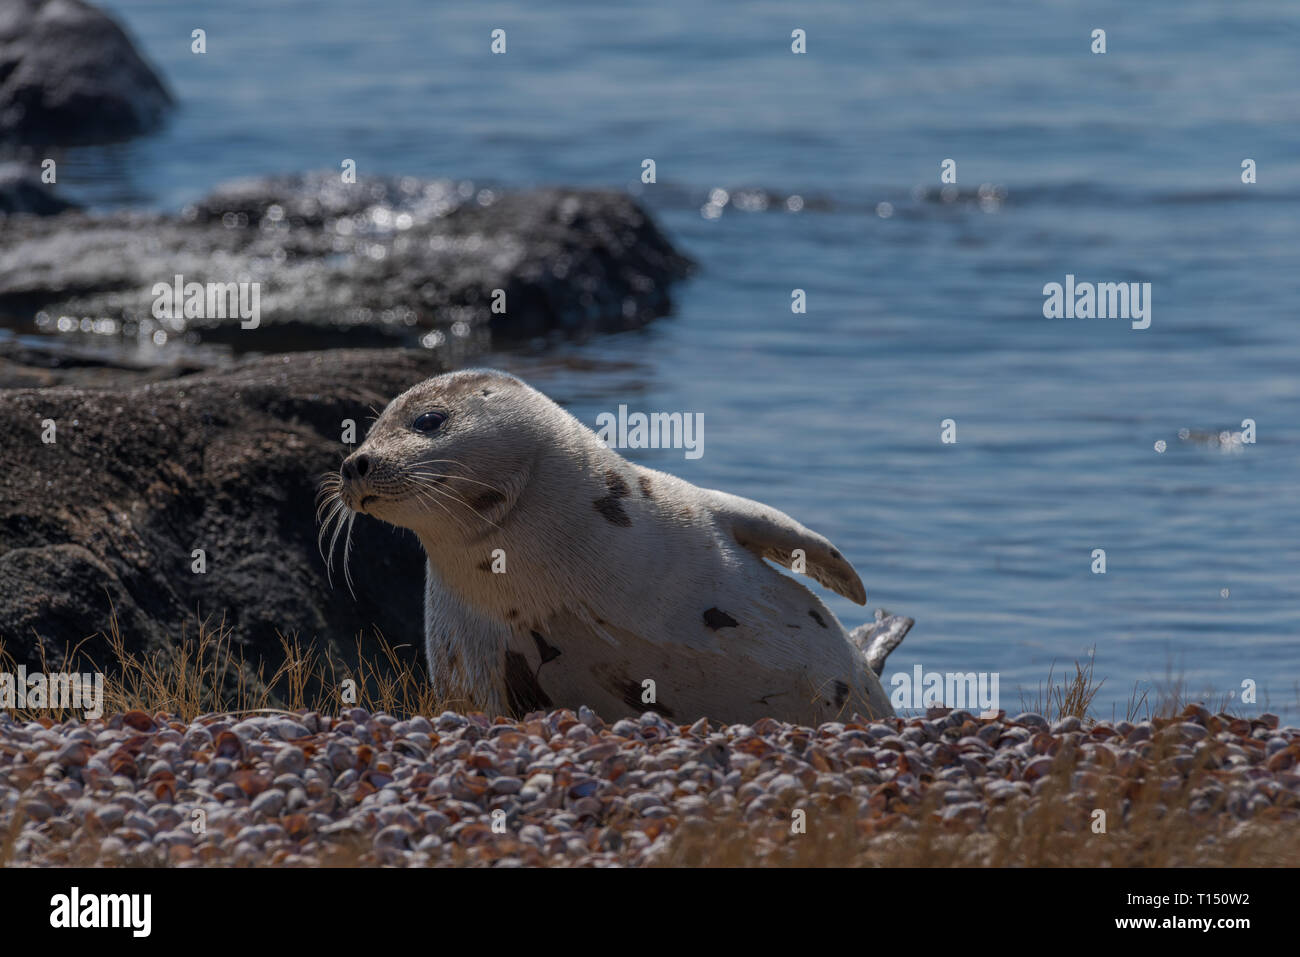 Harp seal resting on beach in winter sun on calm winters day Stock Photo